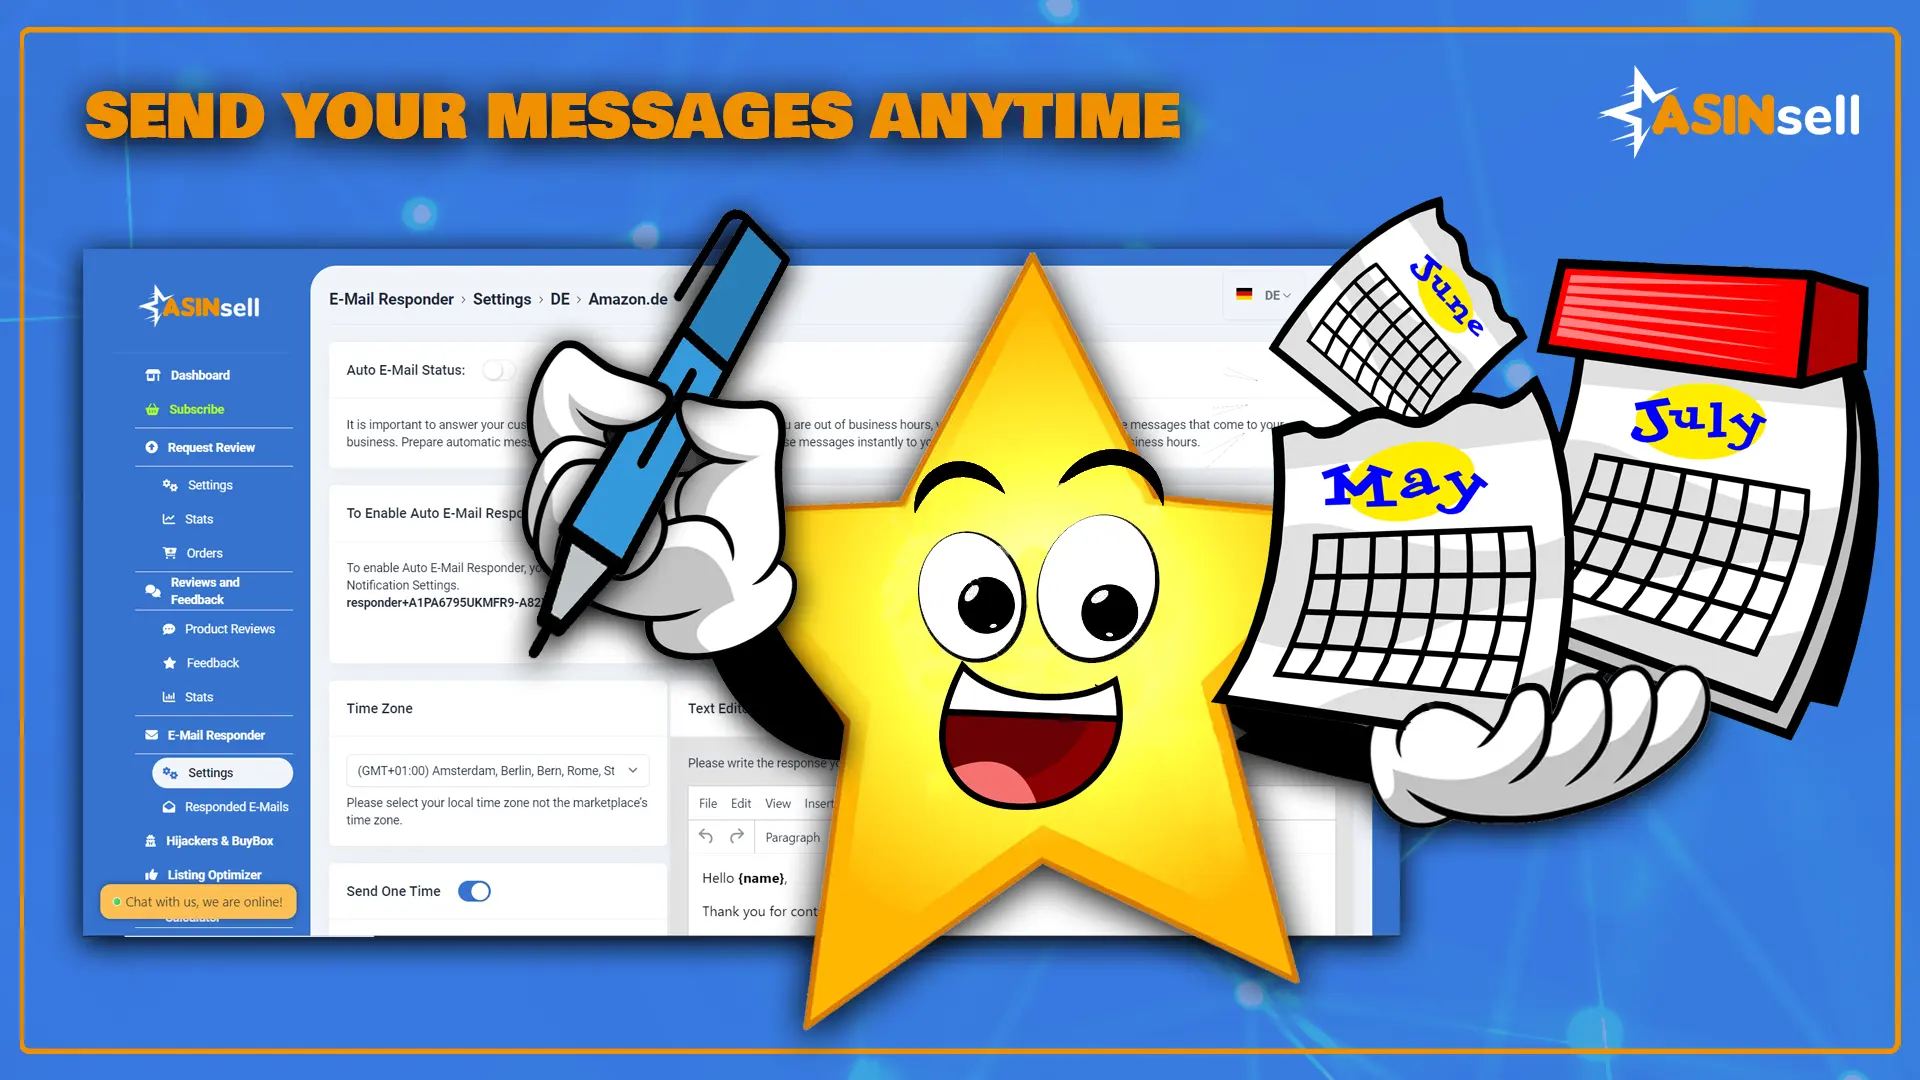 Send Your Messages Anytime